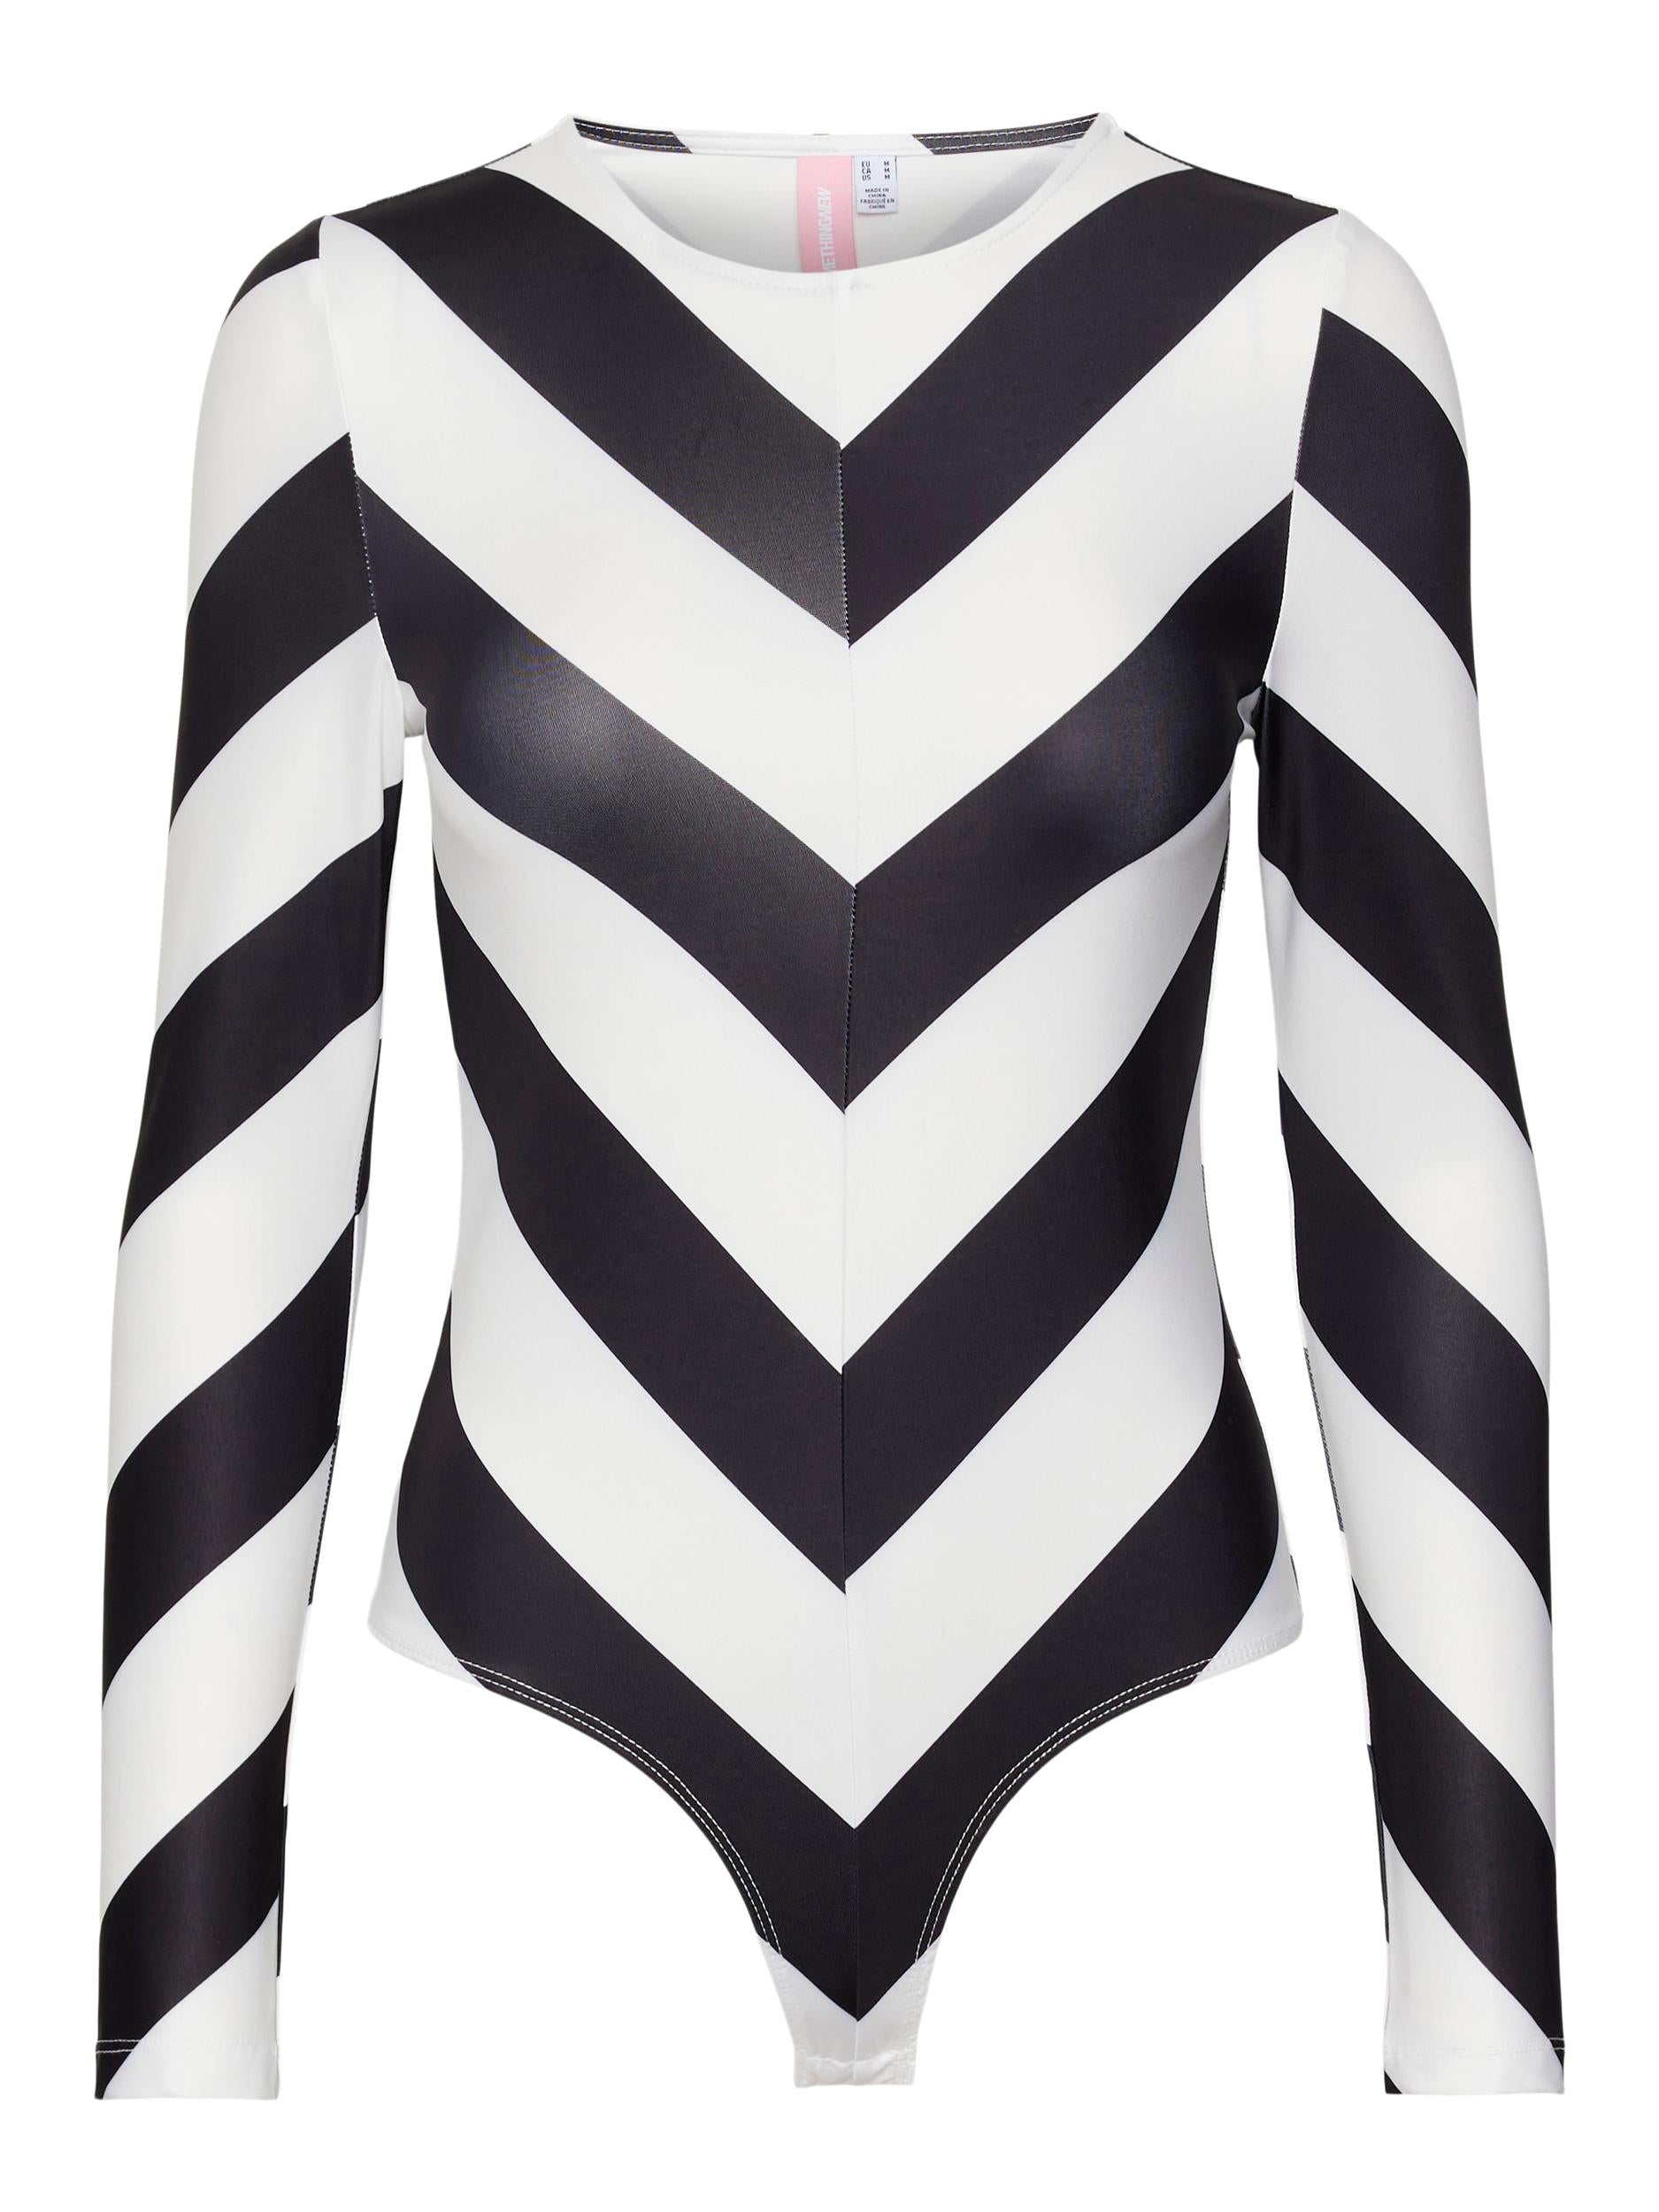 Something new black and white striped body